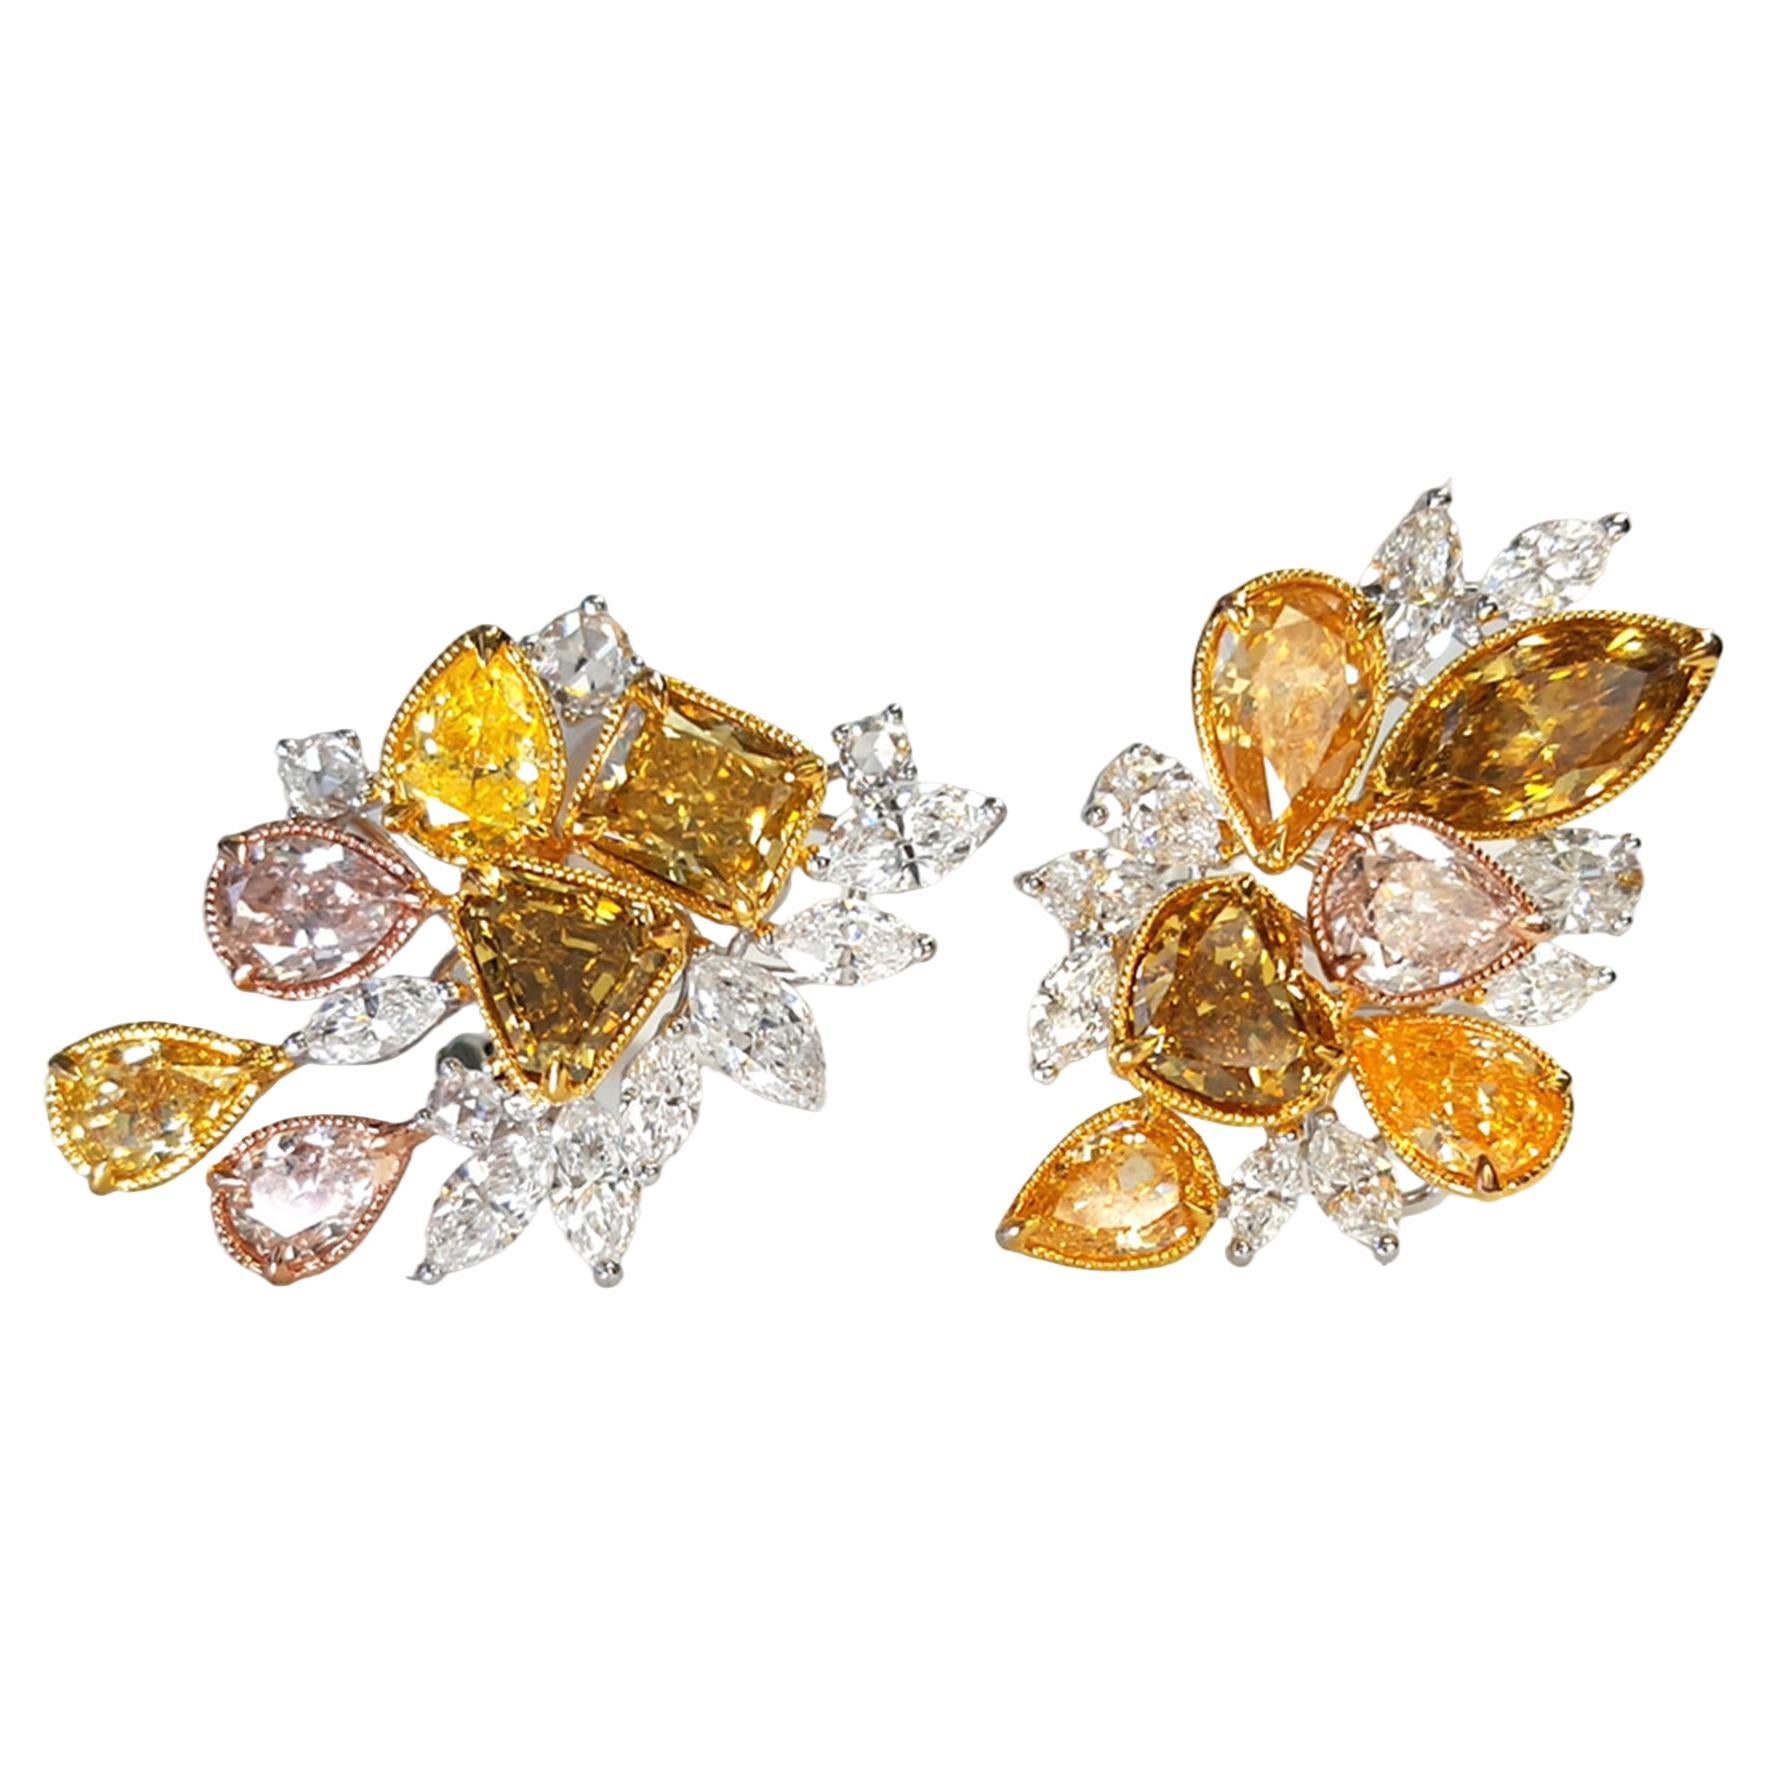 8 Carat Multicolor Diamond Cluster Earrings, 18K white and Yellow Gold For Sale